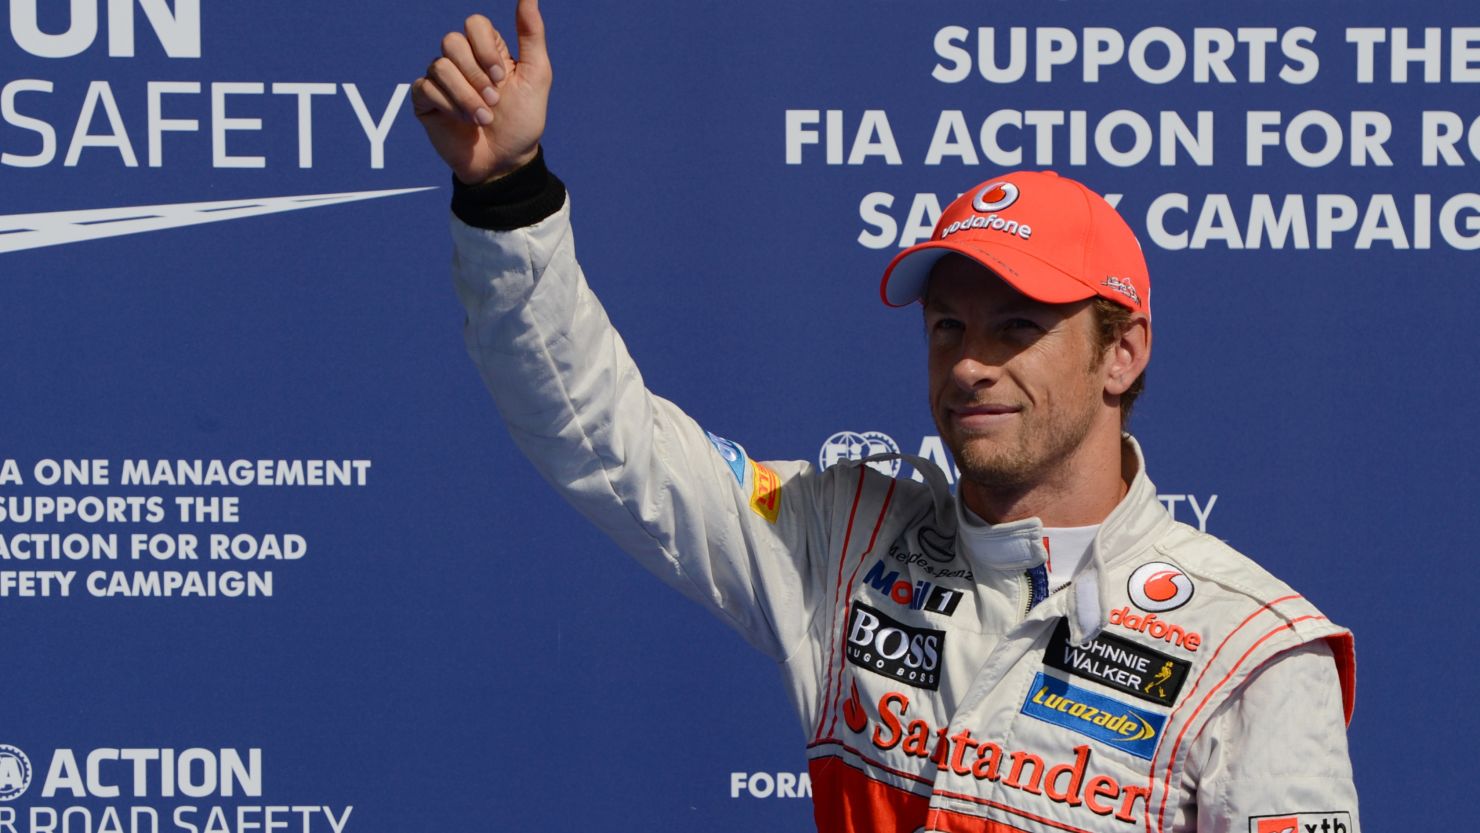 It's thumbs up for Jenson Button after claiming pole for the Belgian Grand Prix for McLaren.